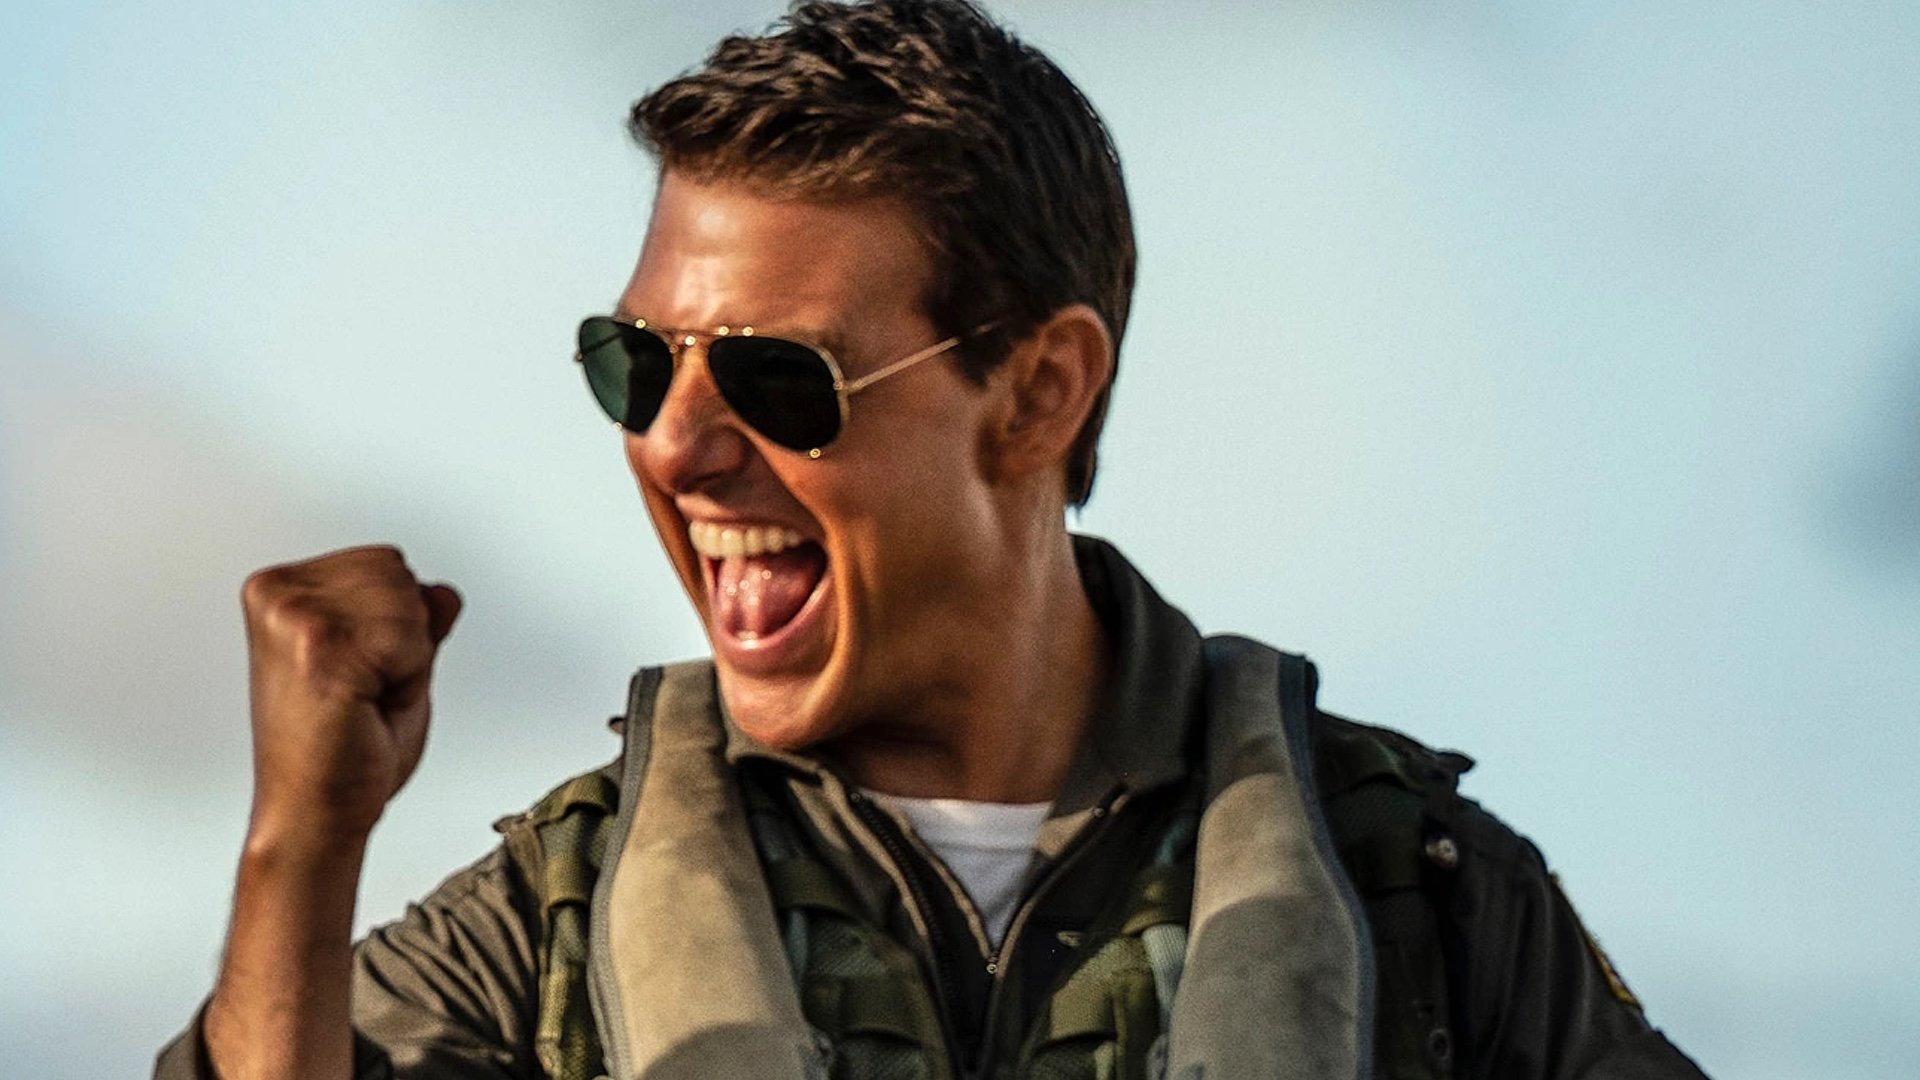 It's official (according to Steven Spielberg): Tom Cruise saved cinema